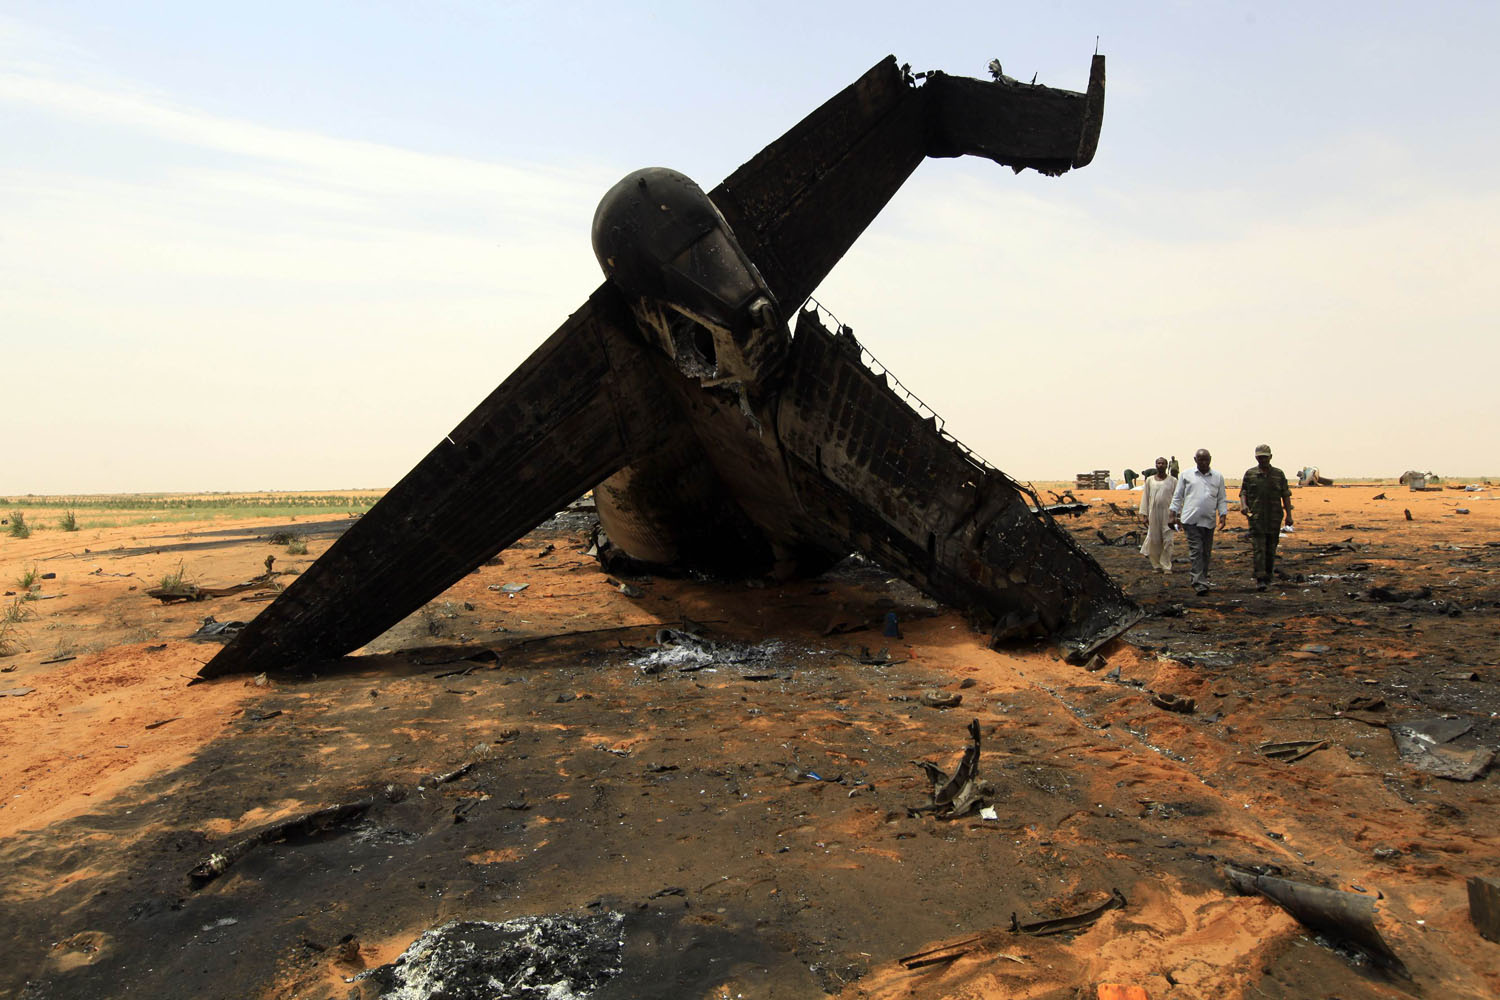 Oct. 8, 2012. Rescue workers walk through the remains of a Sudanese military plane after it crashed at the North Korodofan State border near the capital Khartoum.